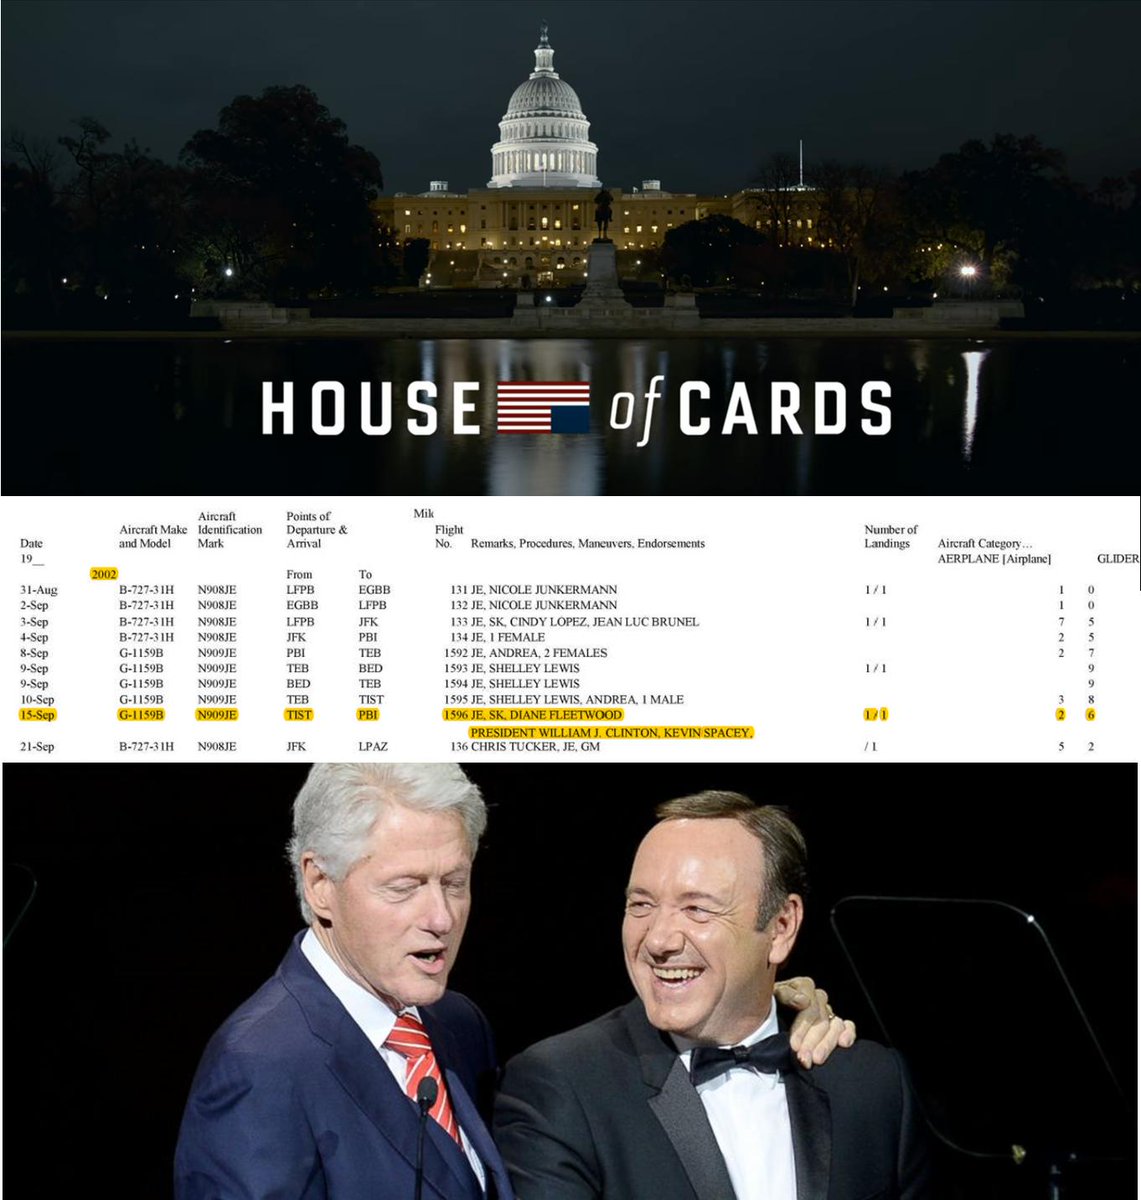 IT WILL BE IMPOSSIBLE TO LOOK AWAY [pt 5 of 13]¡House of Cards!If we're gonna have a barbeque, where are we gonna get the meat? When the entré is for very special clientele? With distinguished tastes?Are YOU in the 'Club'? LA? Lil St. John's?Notice the date of the party.